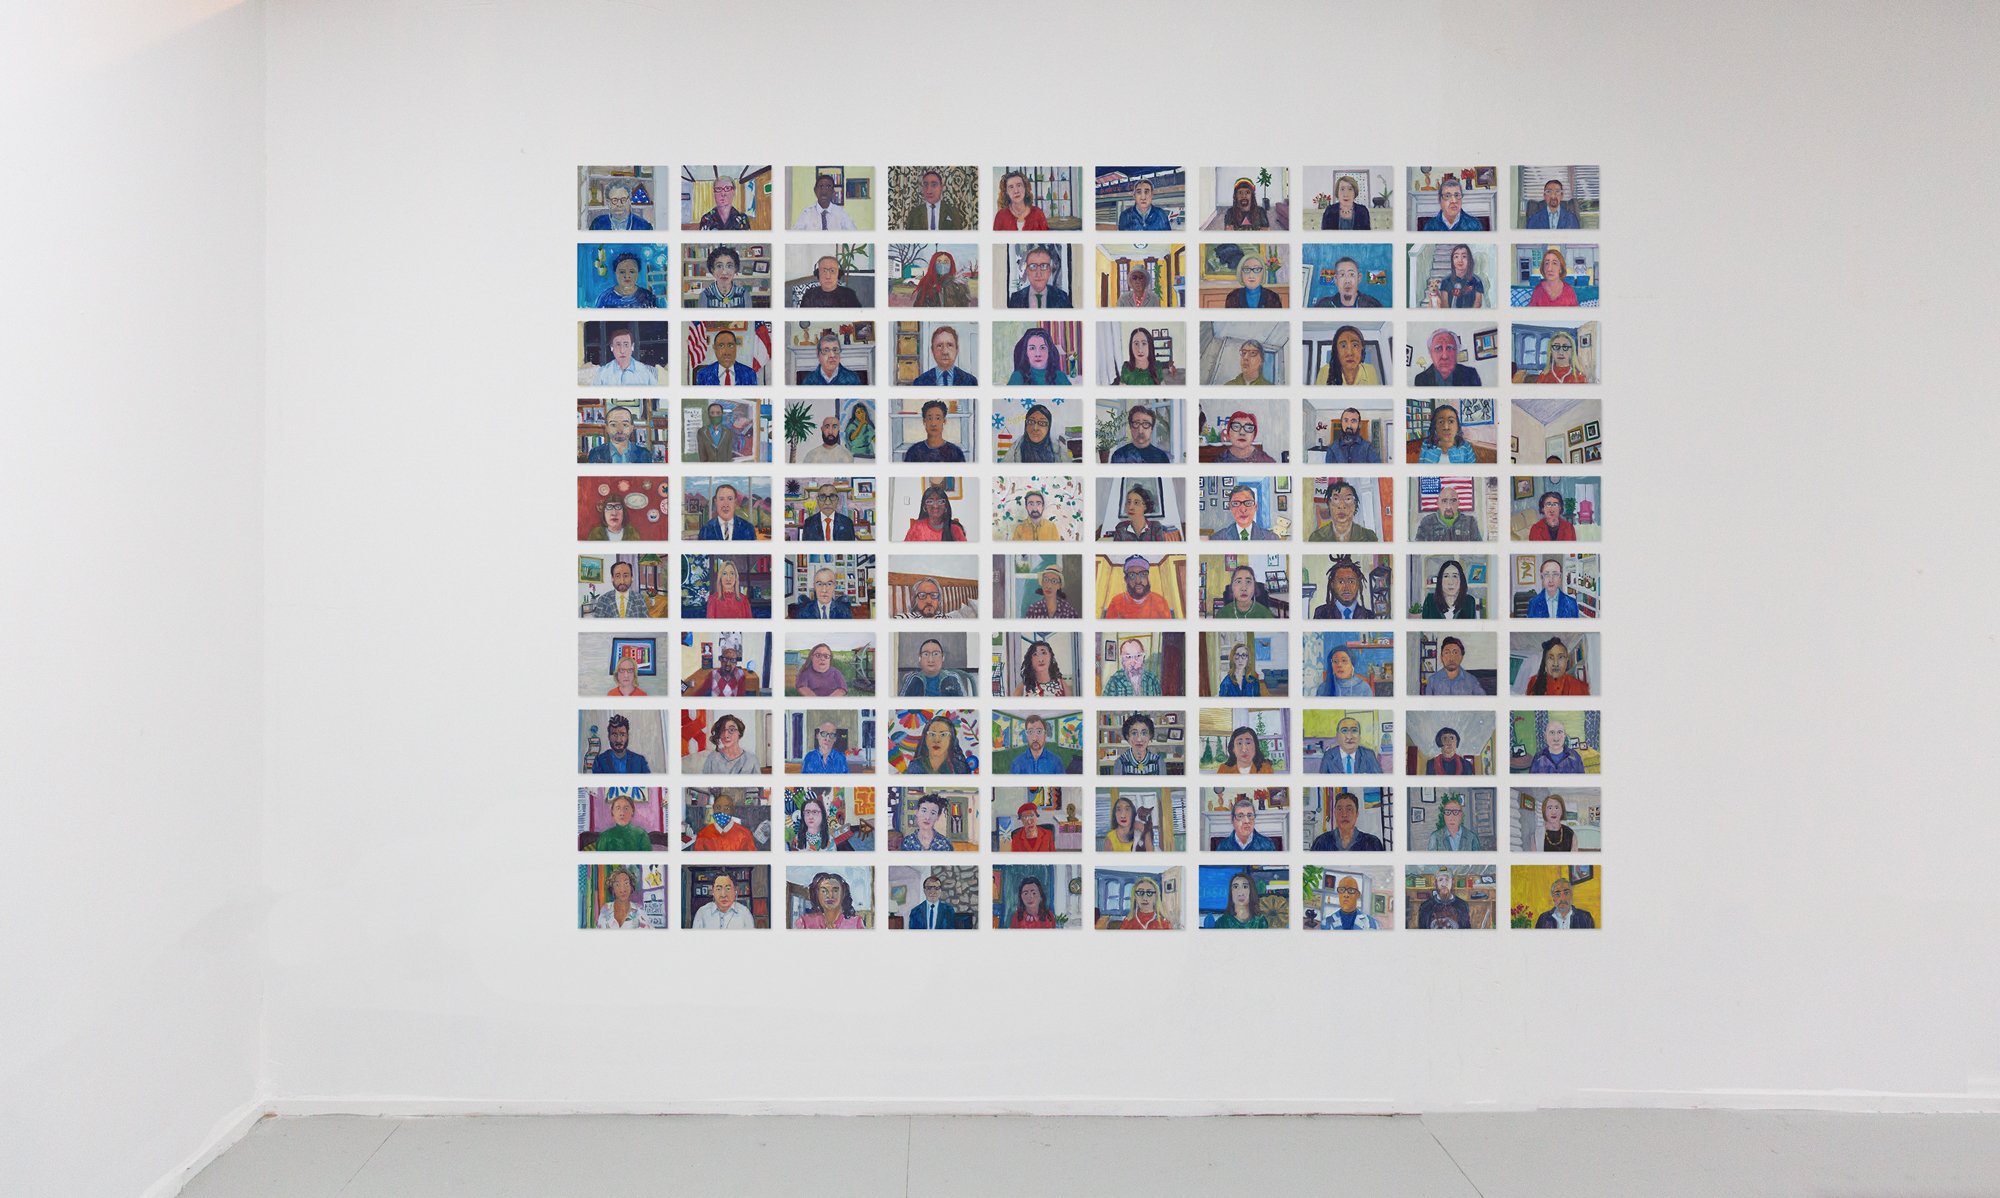     100 Zoom Portraits (Installation View) , 2021, Oil on clay coated panel, size variable     